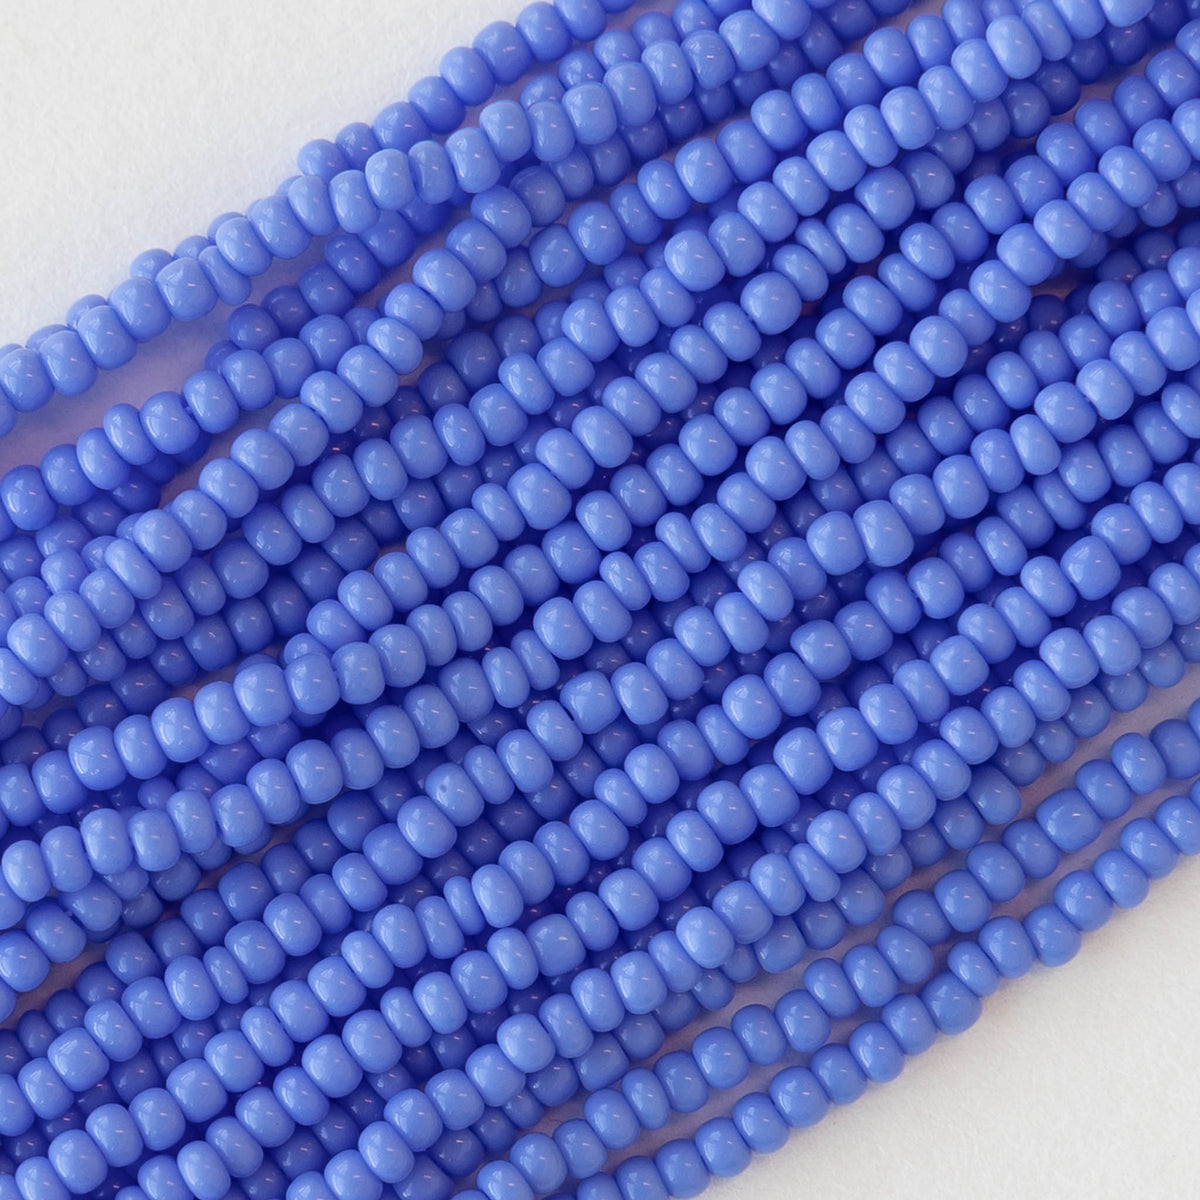 100g BLUE OPAQUE GLASS SEED BEADS 11/0 2mm 8/0 3mm 6/0 4mm